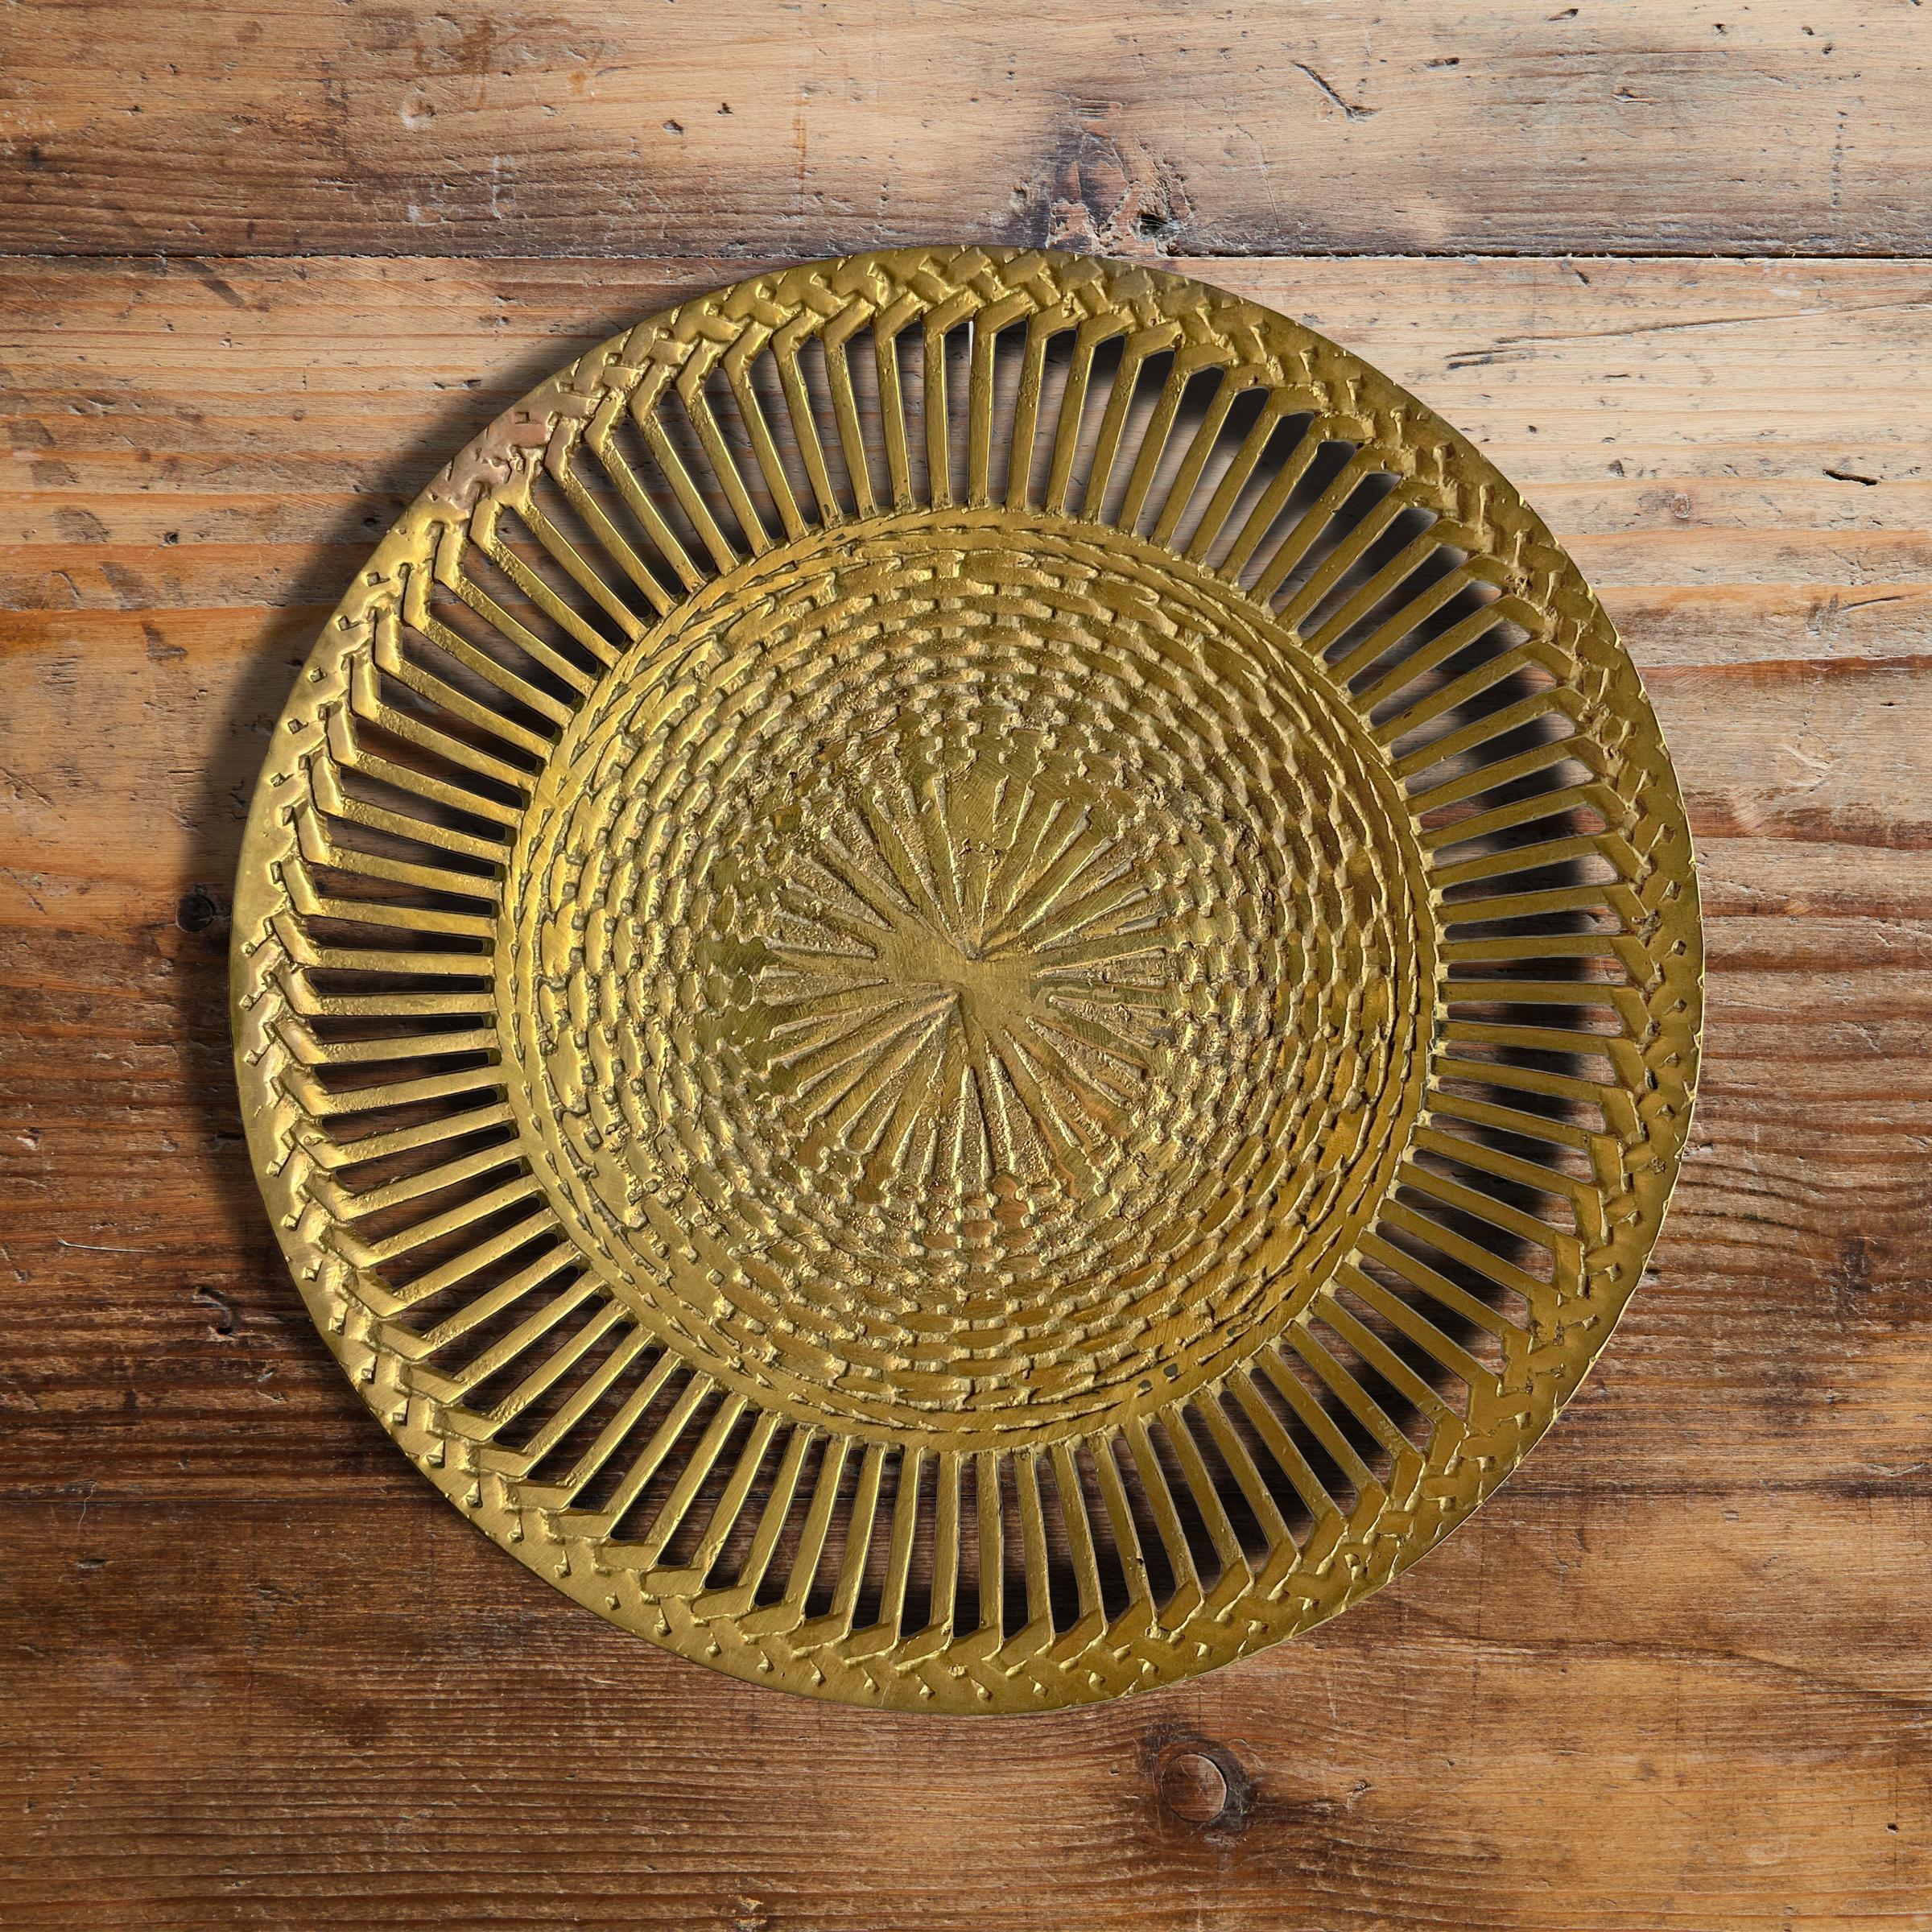 A vintage Italian cast brass bowl with a woven basket pattern and a pierced edge detail. Perfect for catching your keys wallet, and pocket change in your bedroom, or holding your mail in your entry.